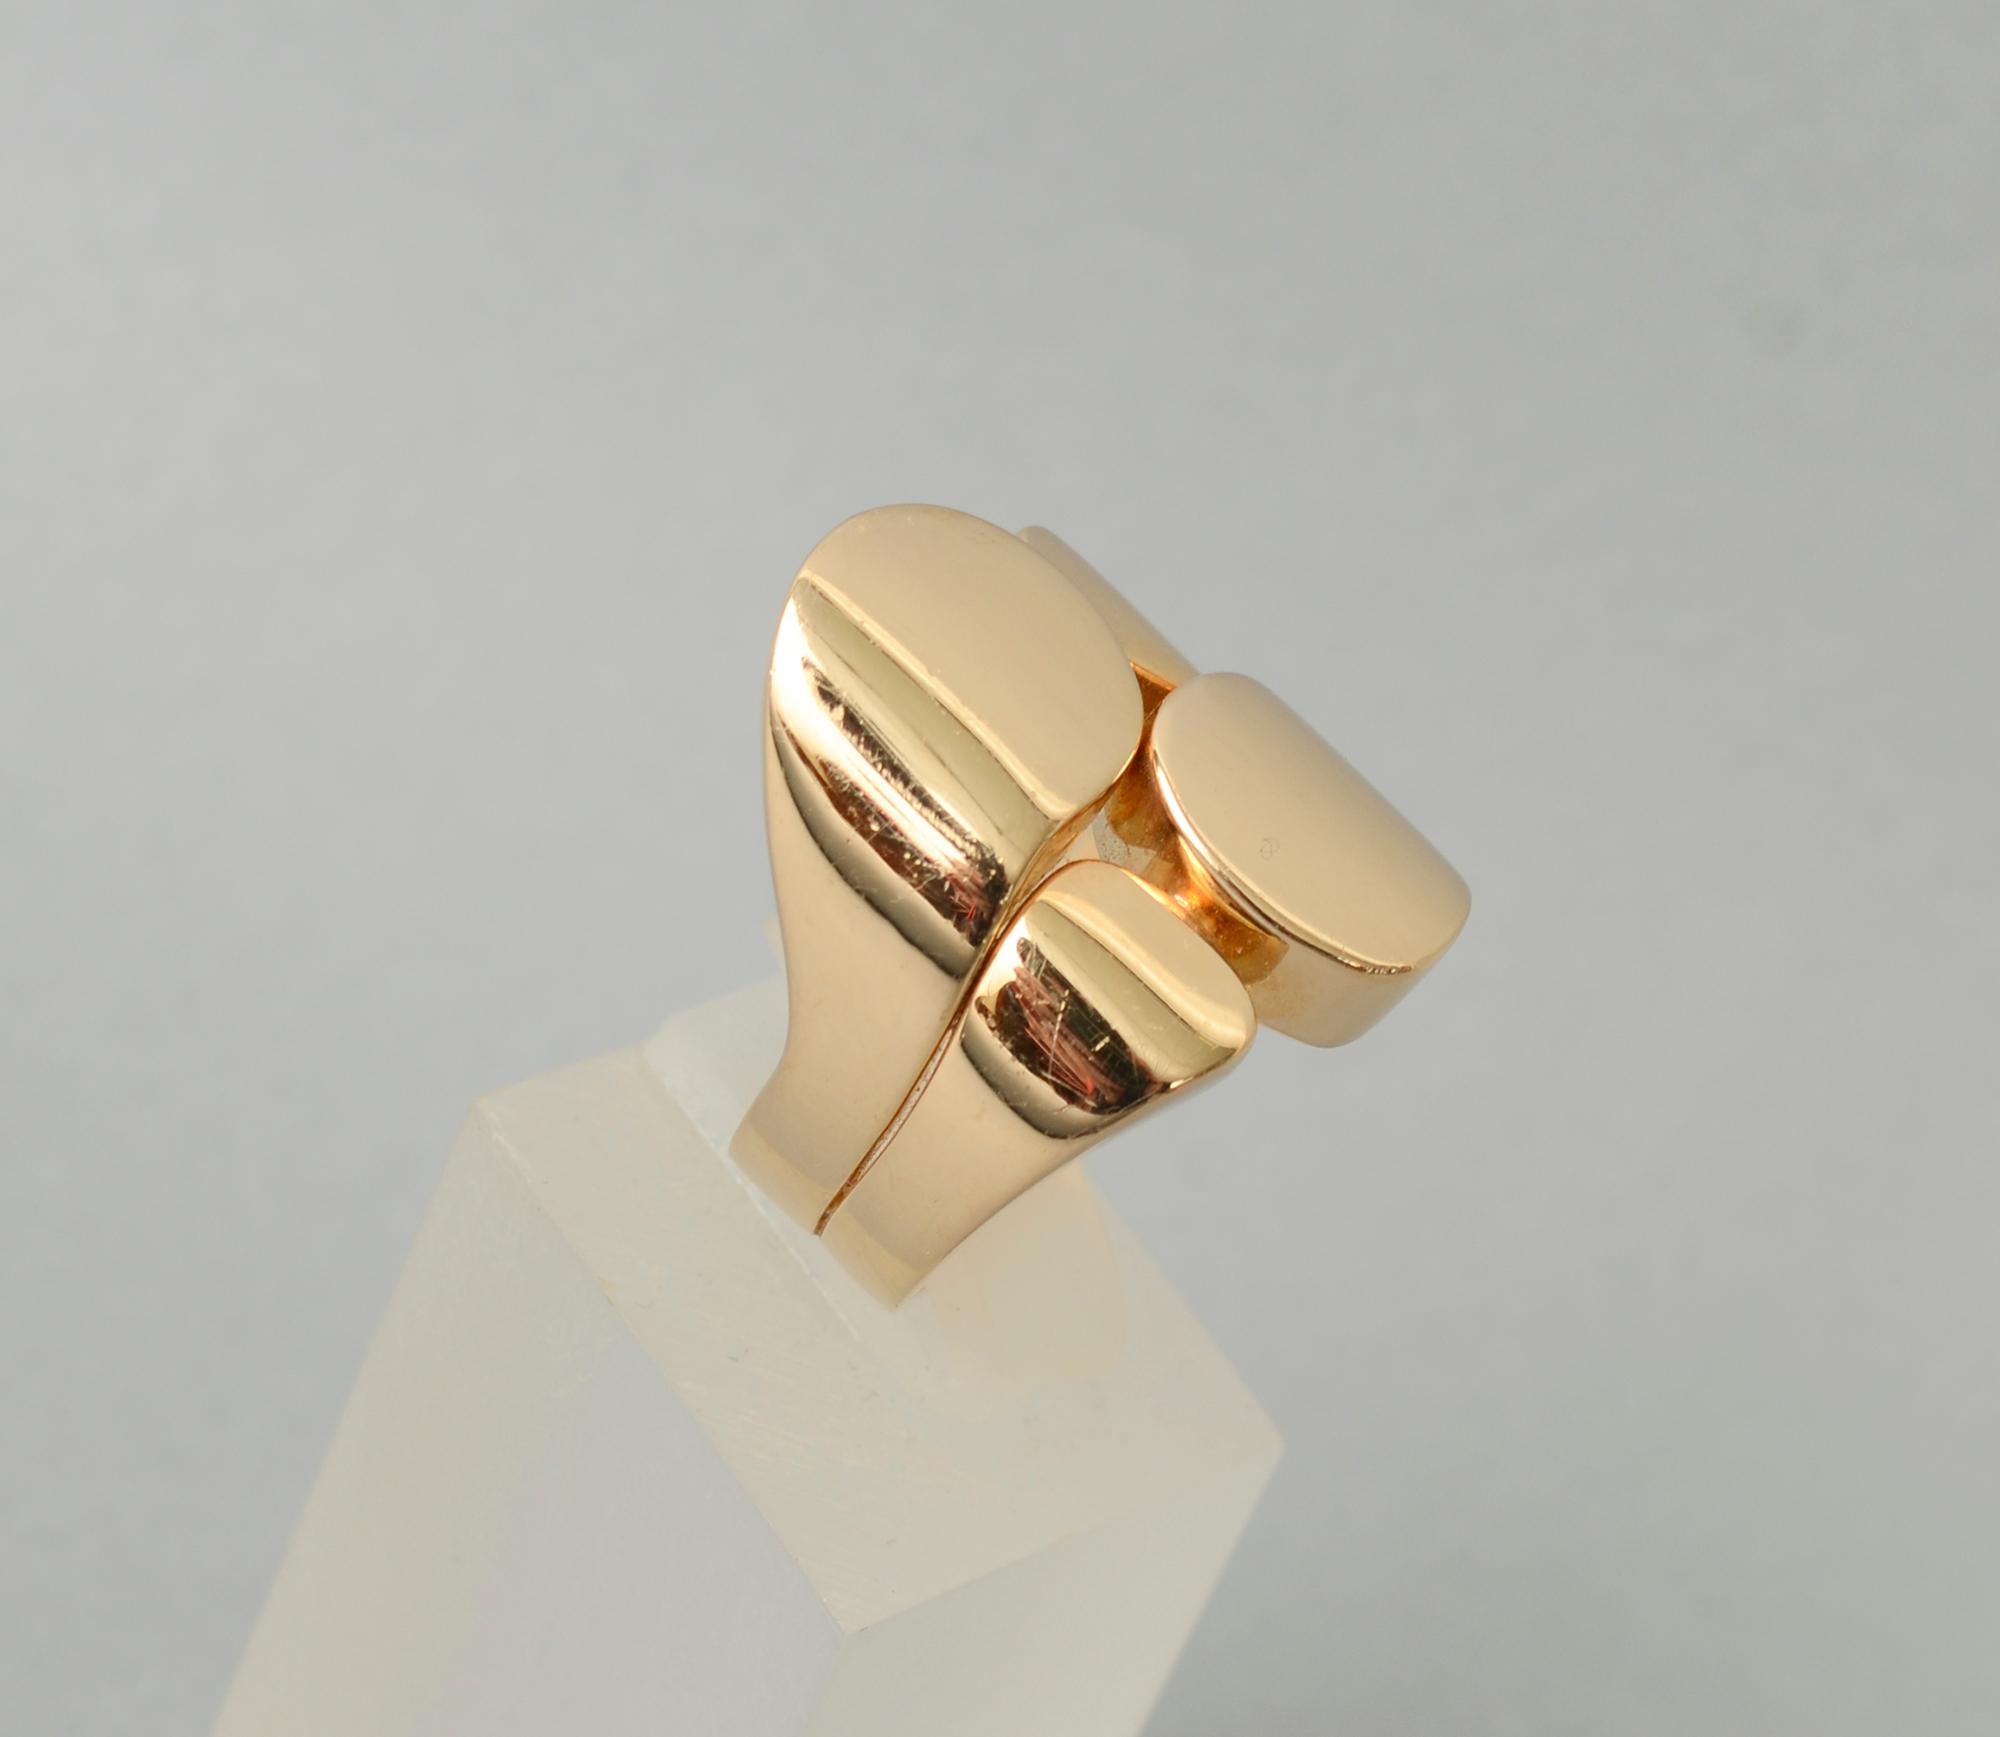 Fabulous modernist design gold ring by Valentin Magro. Although the ring is actually fairly contemporary, it is very much in the modernist style. It is wonderfully bold and would be effective on a man or woman. The ring measures one inch from front